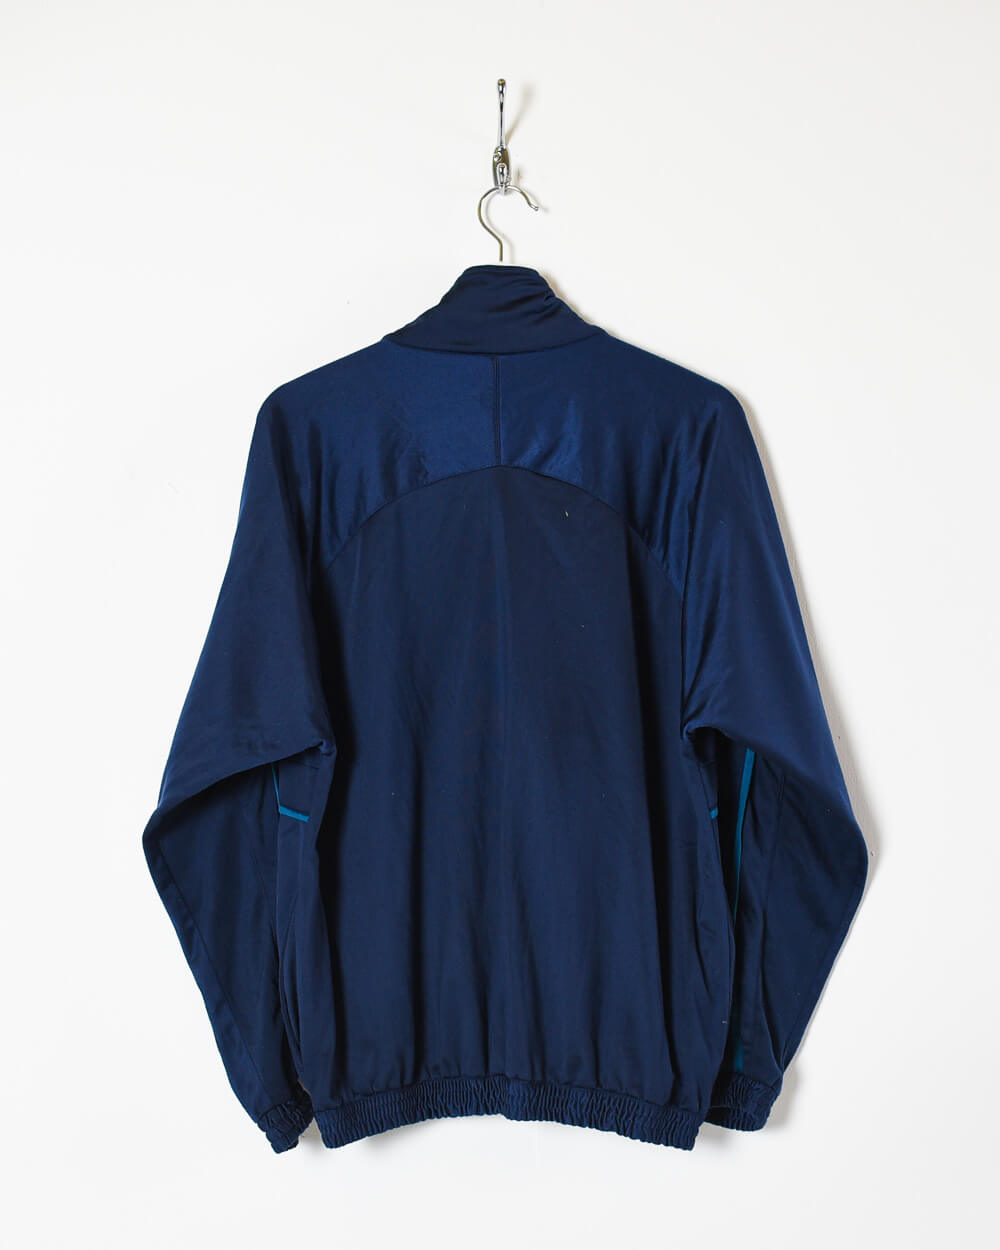 Navy Vintage Tracksuit Top - Small